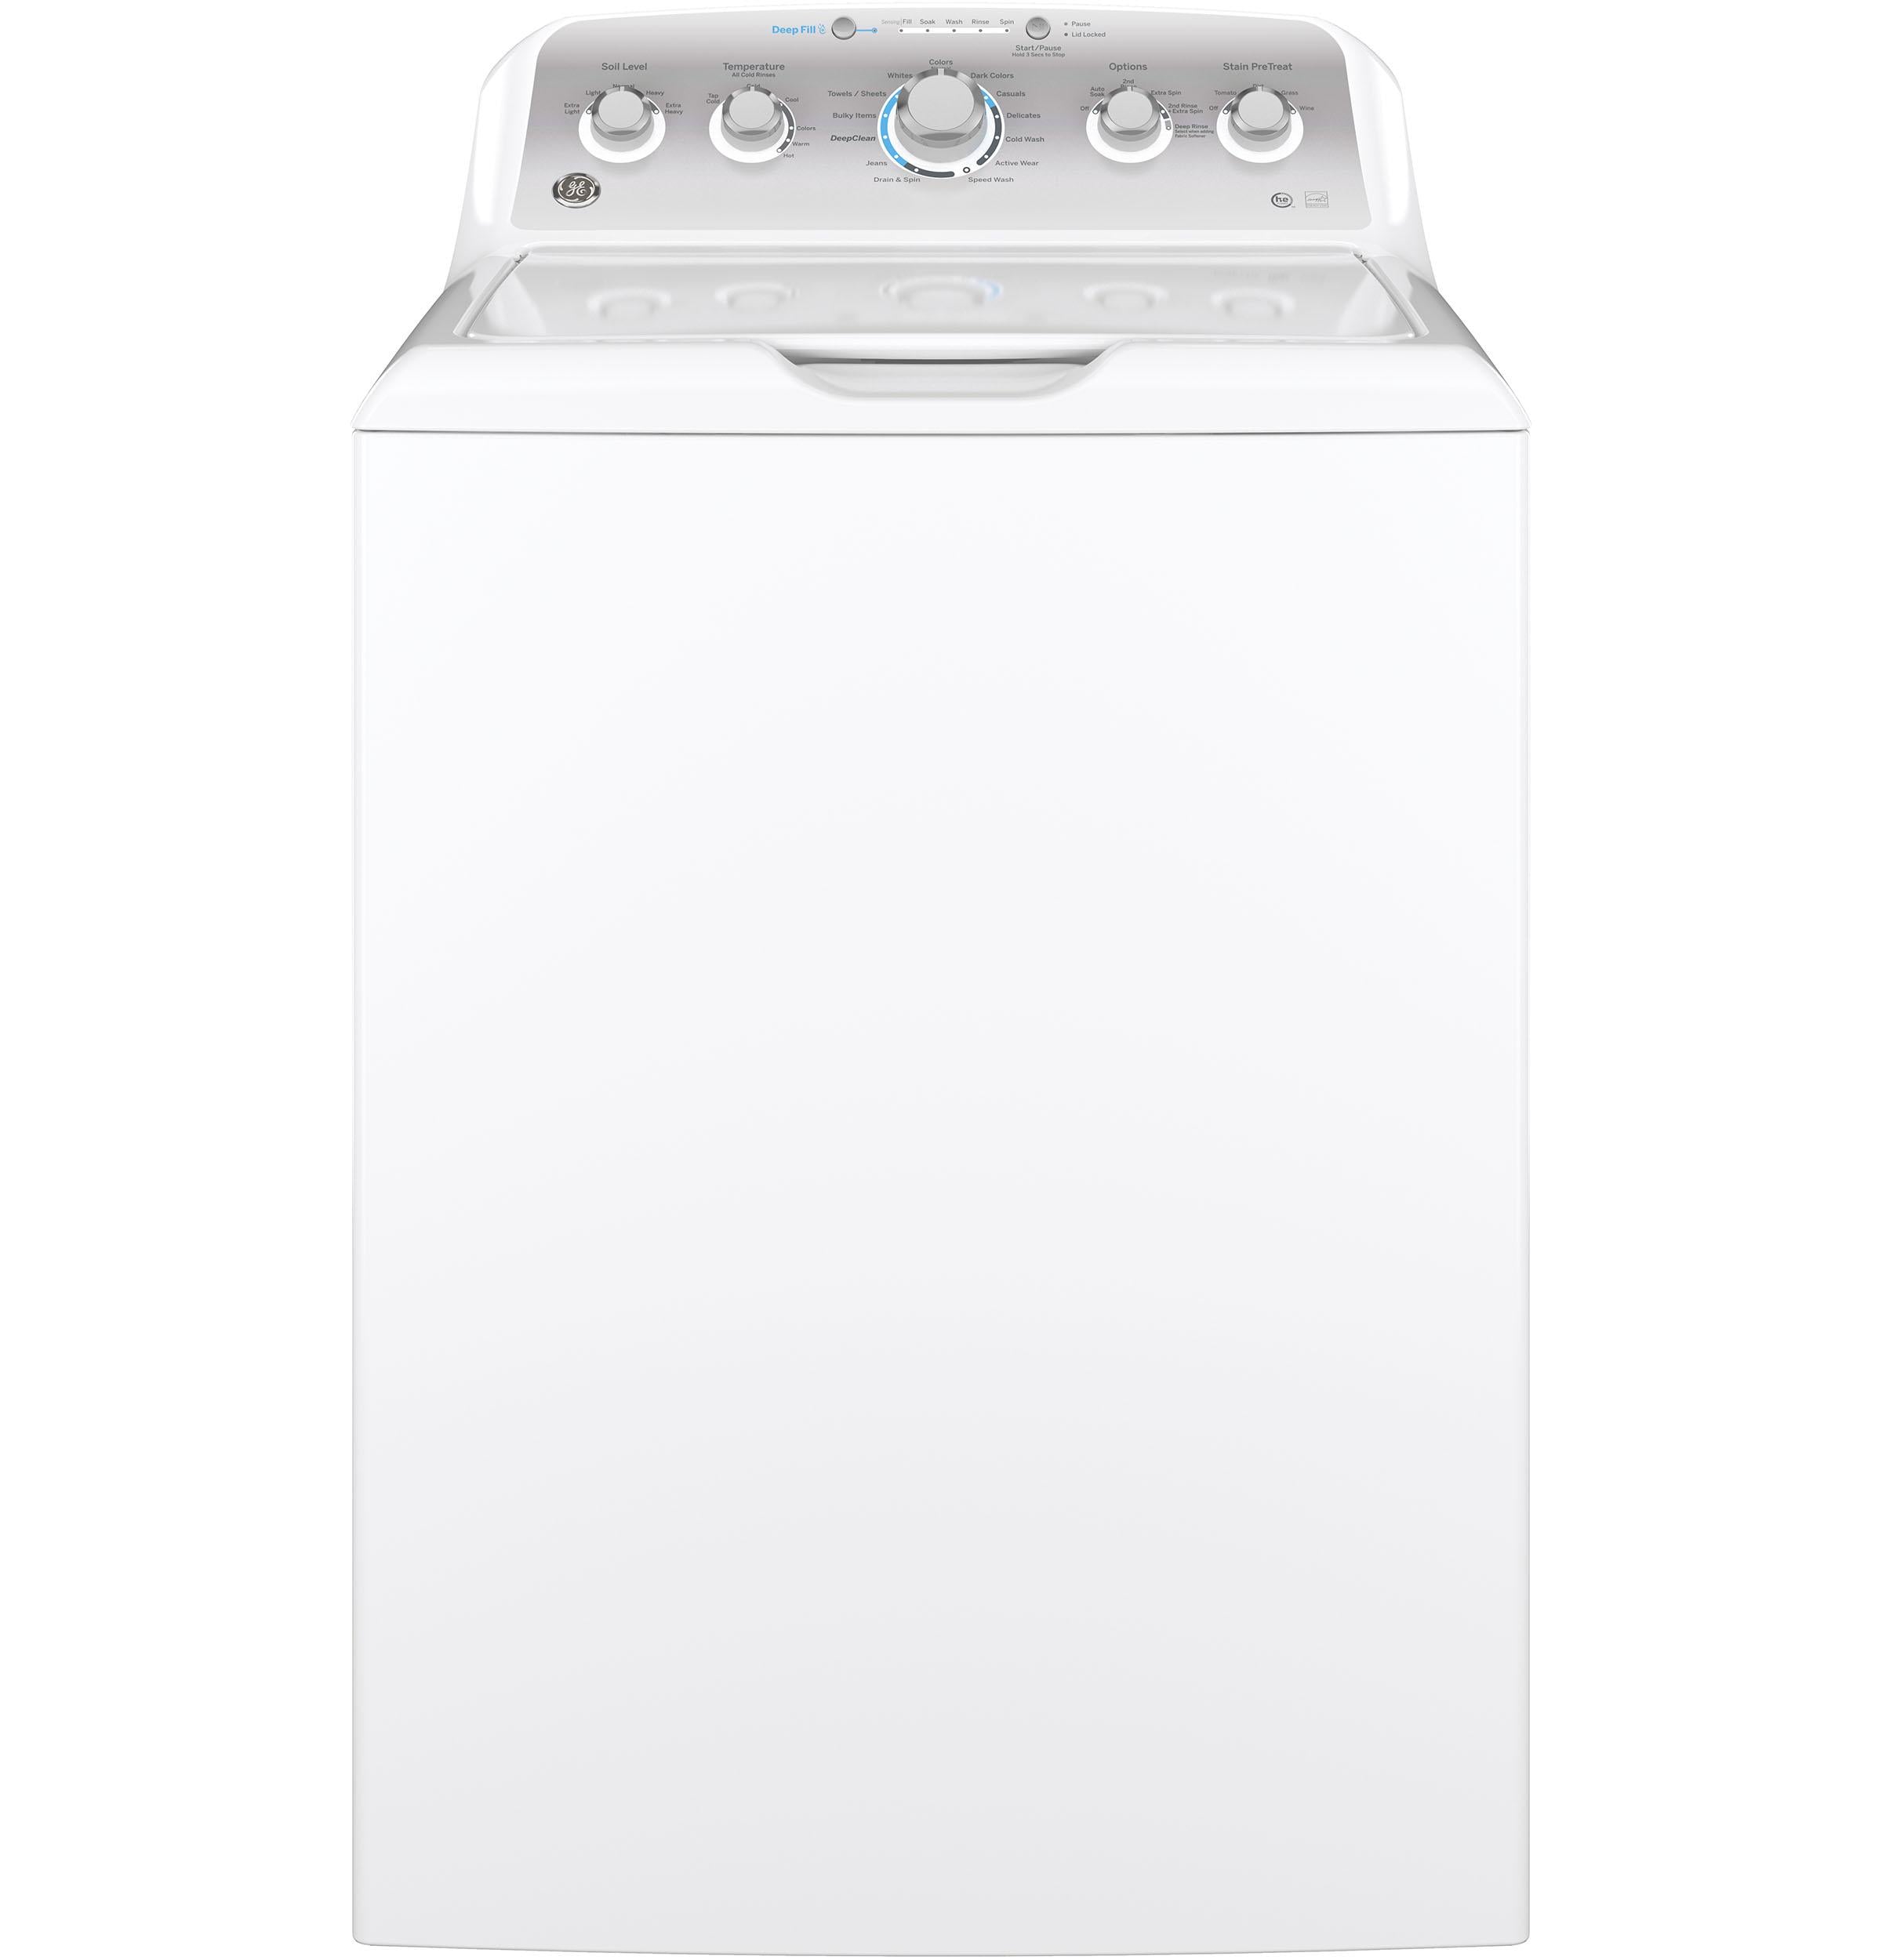 GE® ENERGY STAR® 4.6 cu. ft. Capacity Washer with Stainless Steel Basket